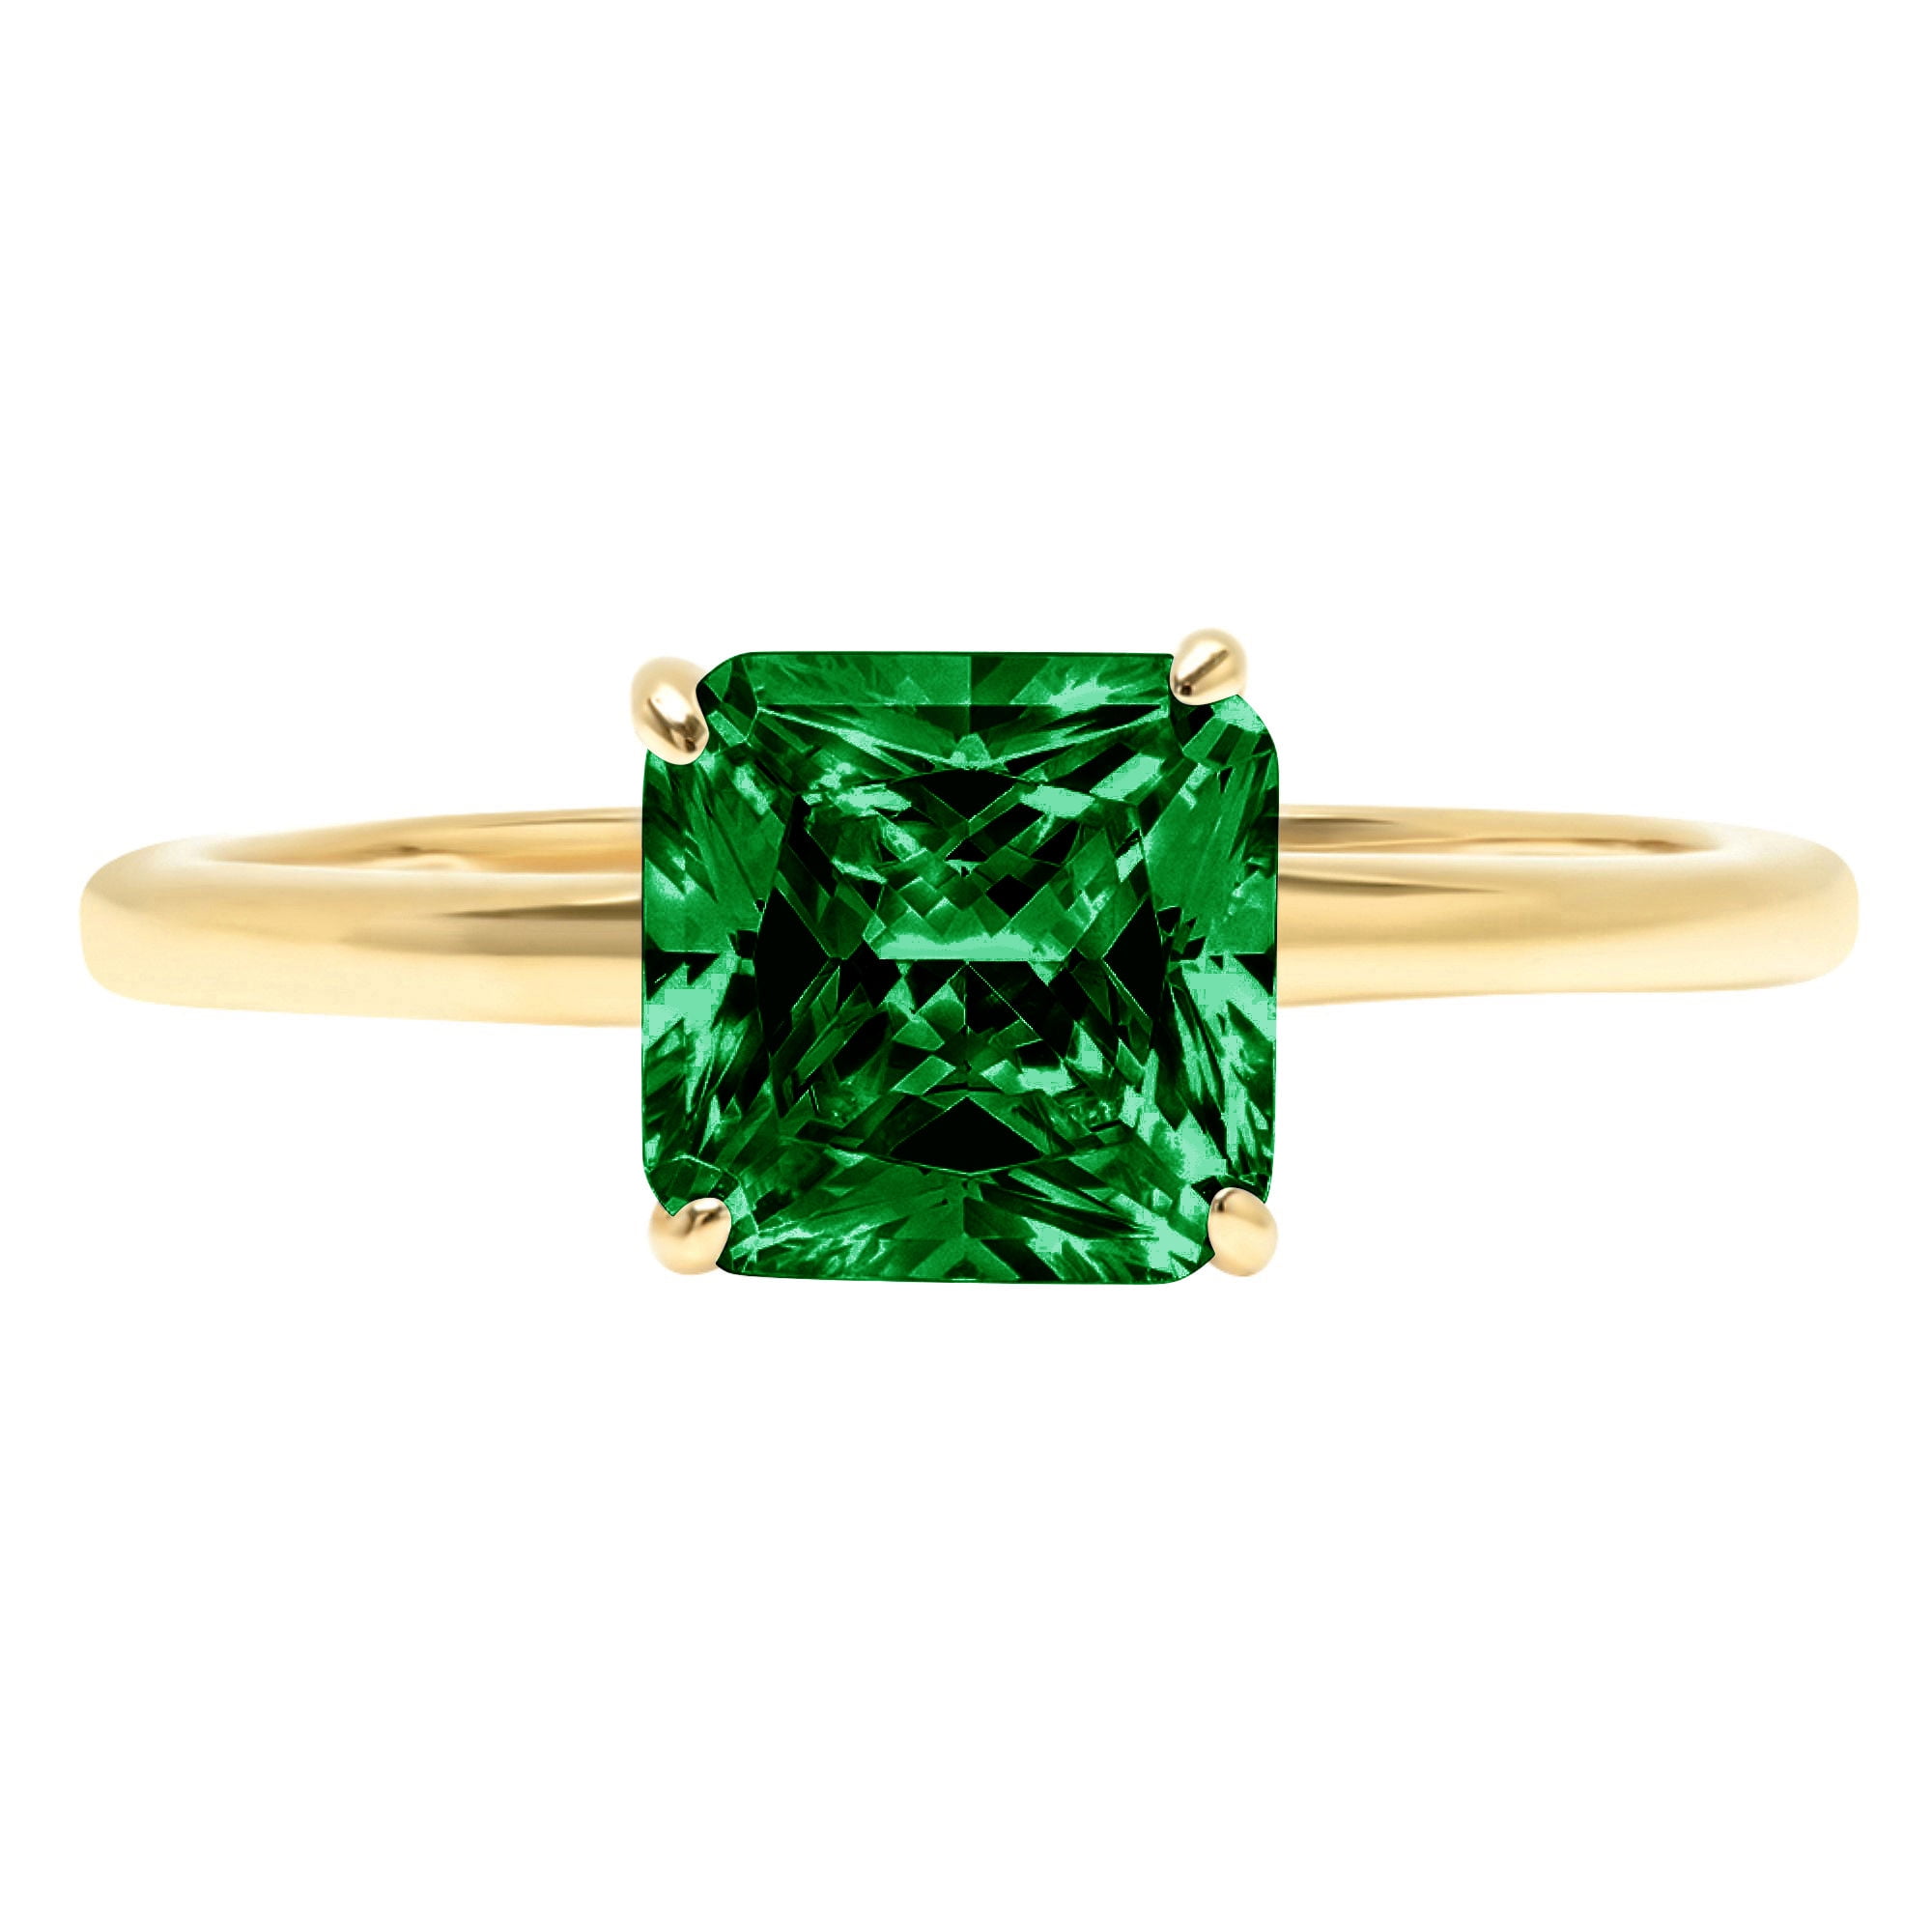 3Ct Oval Green Emerald Solitaire Men's Wedding Band Ring 14k Yellow Gold Over 